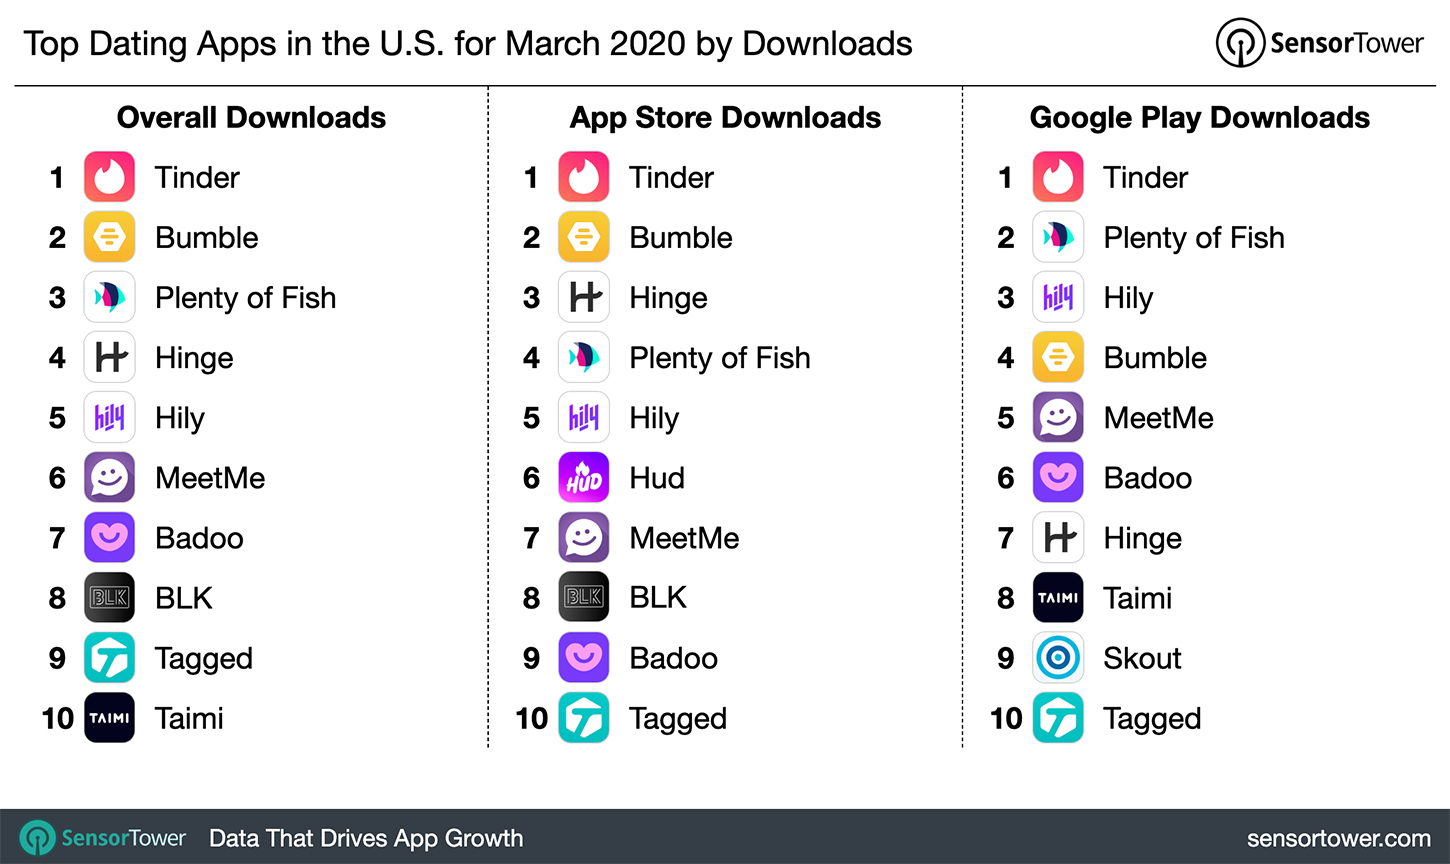 Top Dating Apps in the U.S. for March 2020 by Downloads